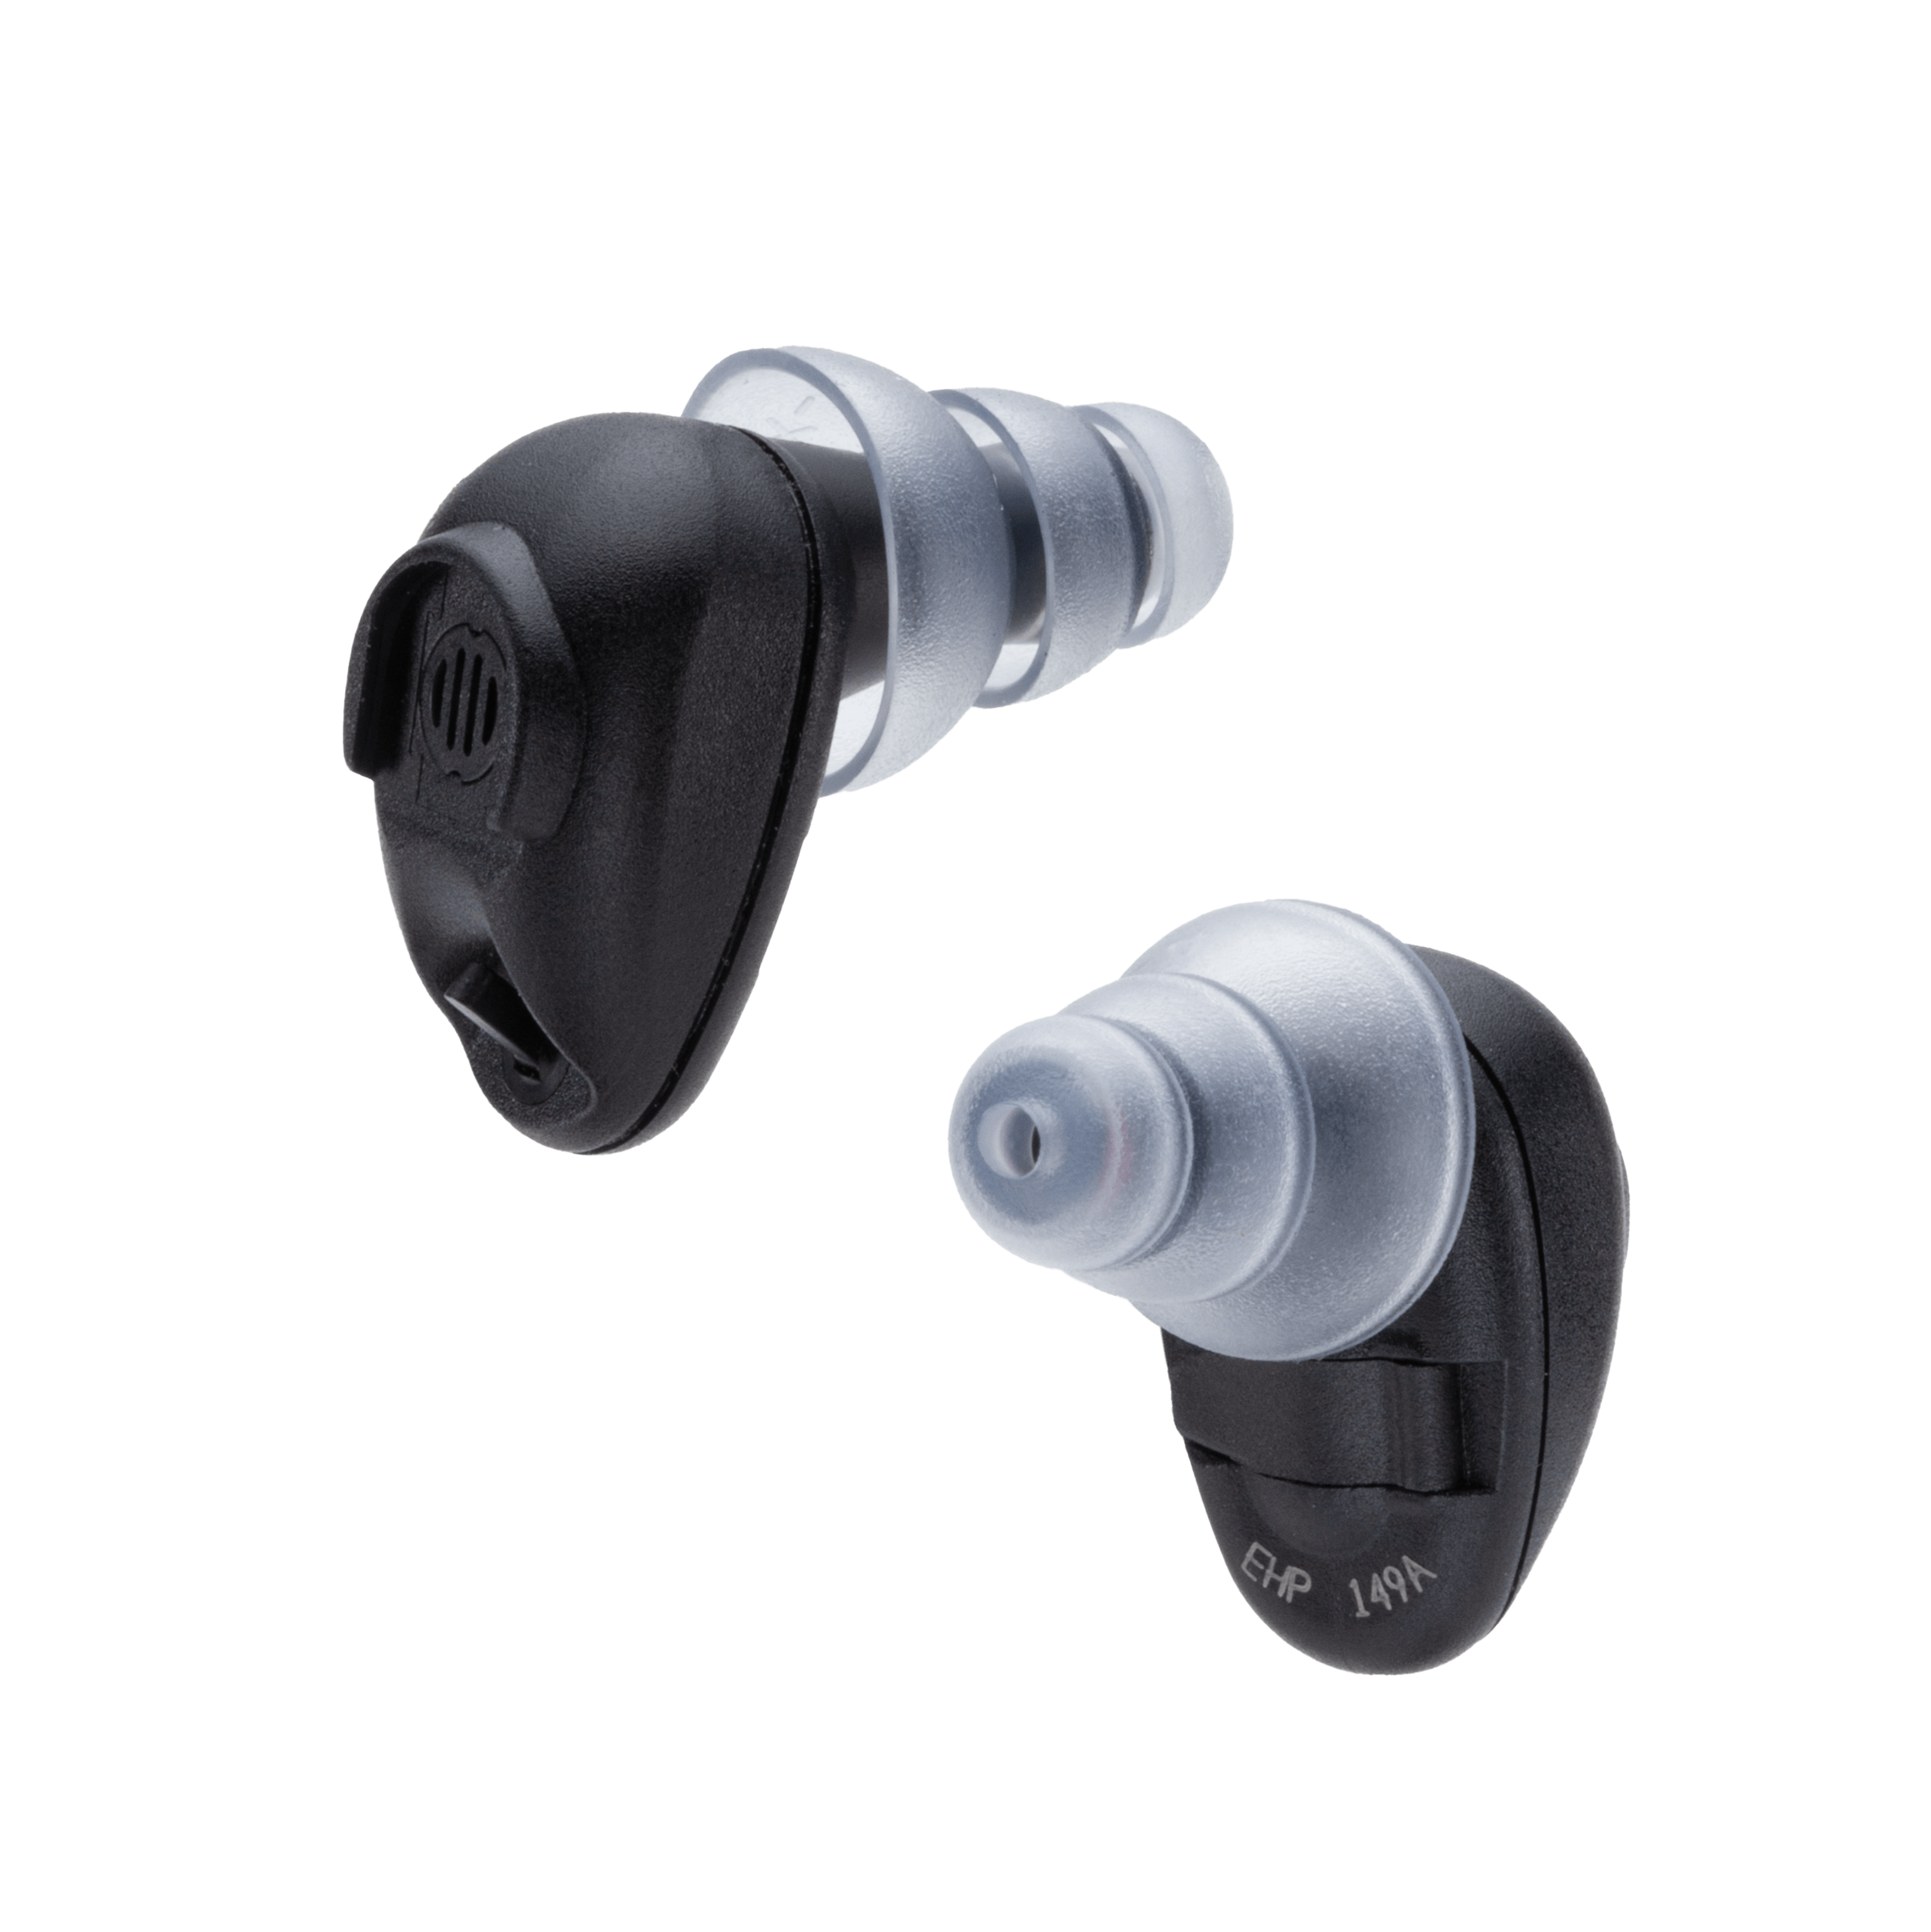 Hearing Protection for Gun Range Electronic Shooting Od Ear Protection 